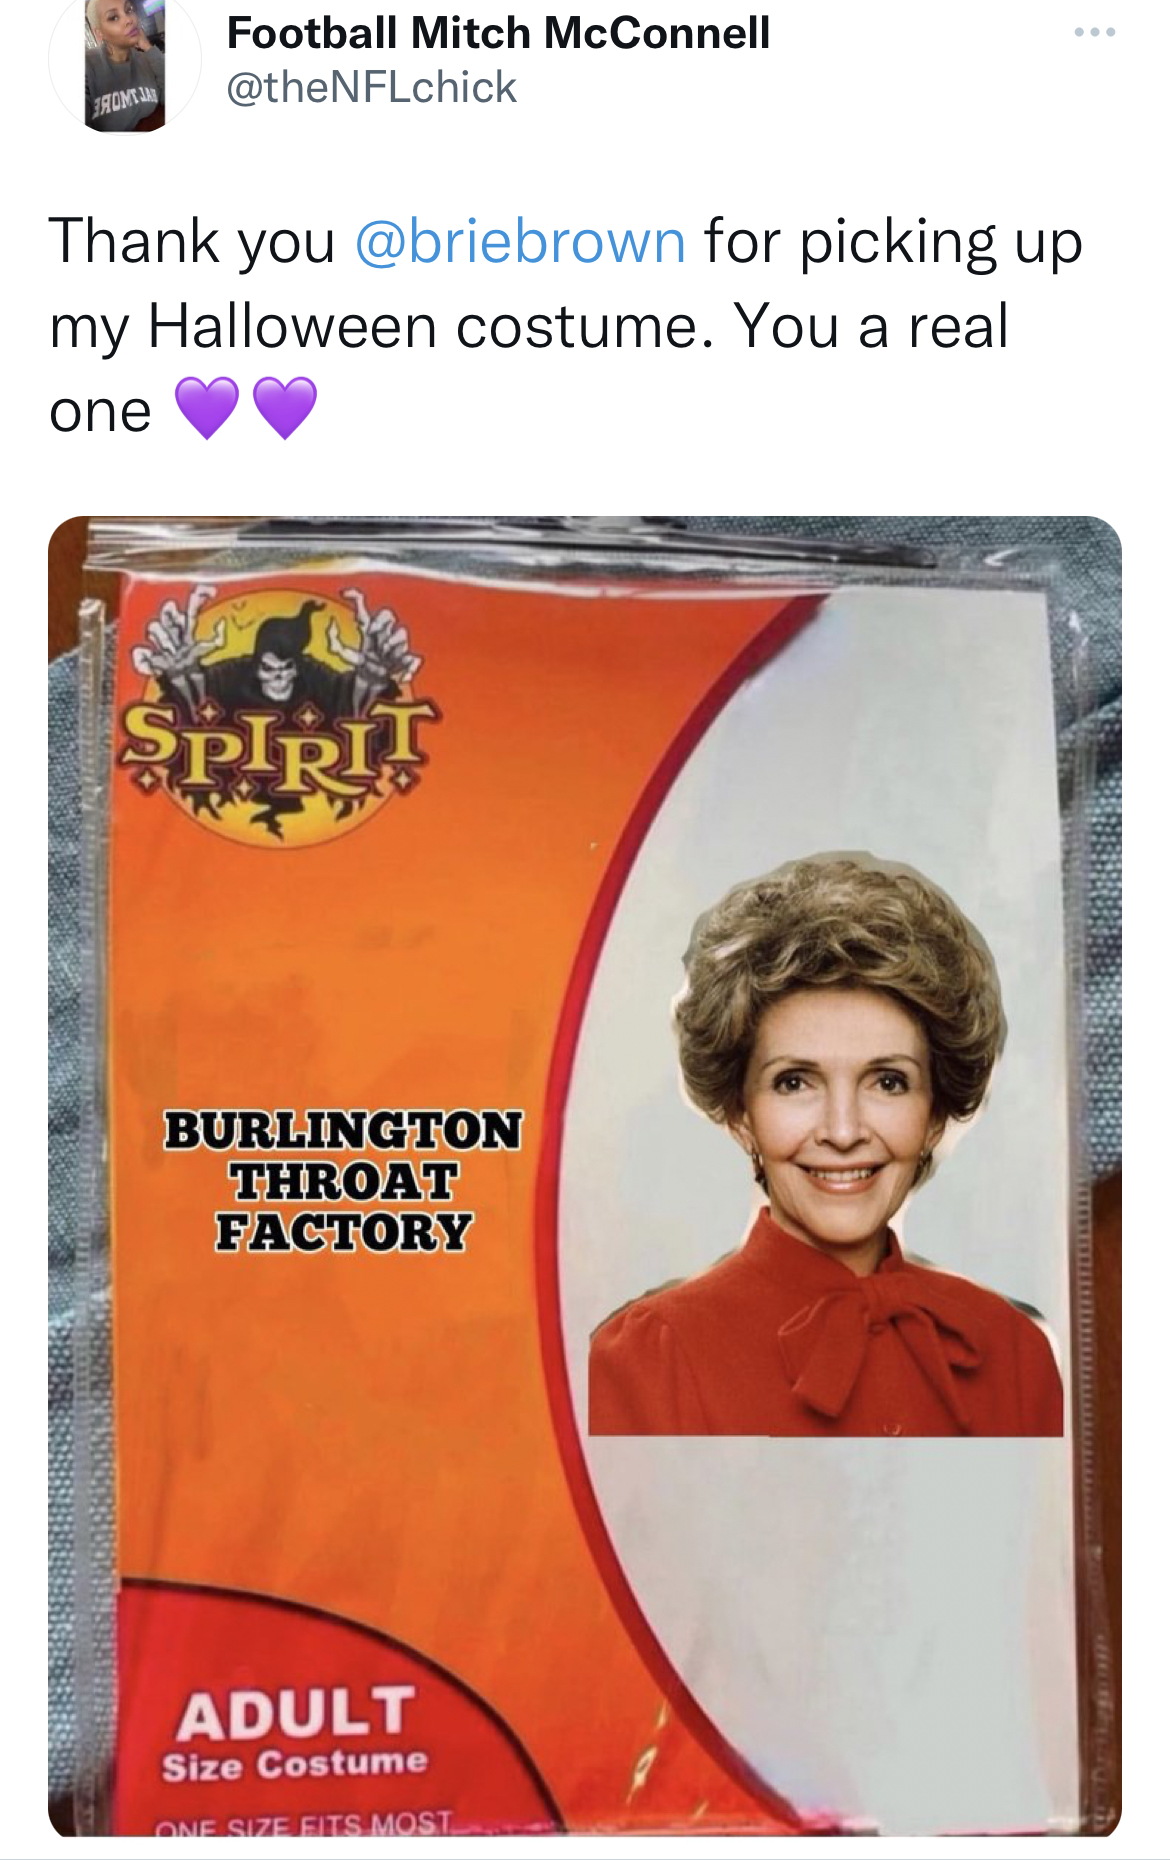 Costume Memes - nancy reagan - Football Mitch McConnell Thank you for picking up my Halloween costume. You a real one Spirit Burlington Throat Factory Adult Size Costume One Size Fite Most